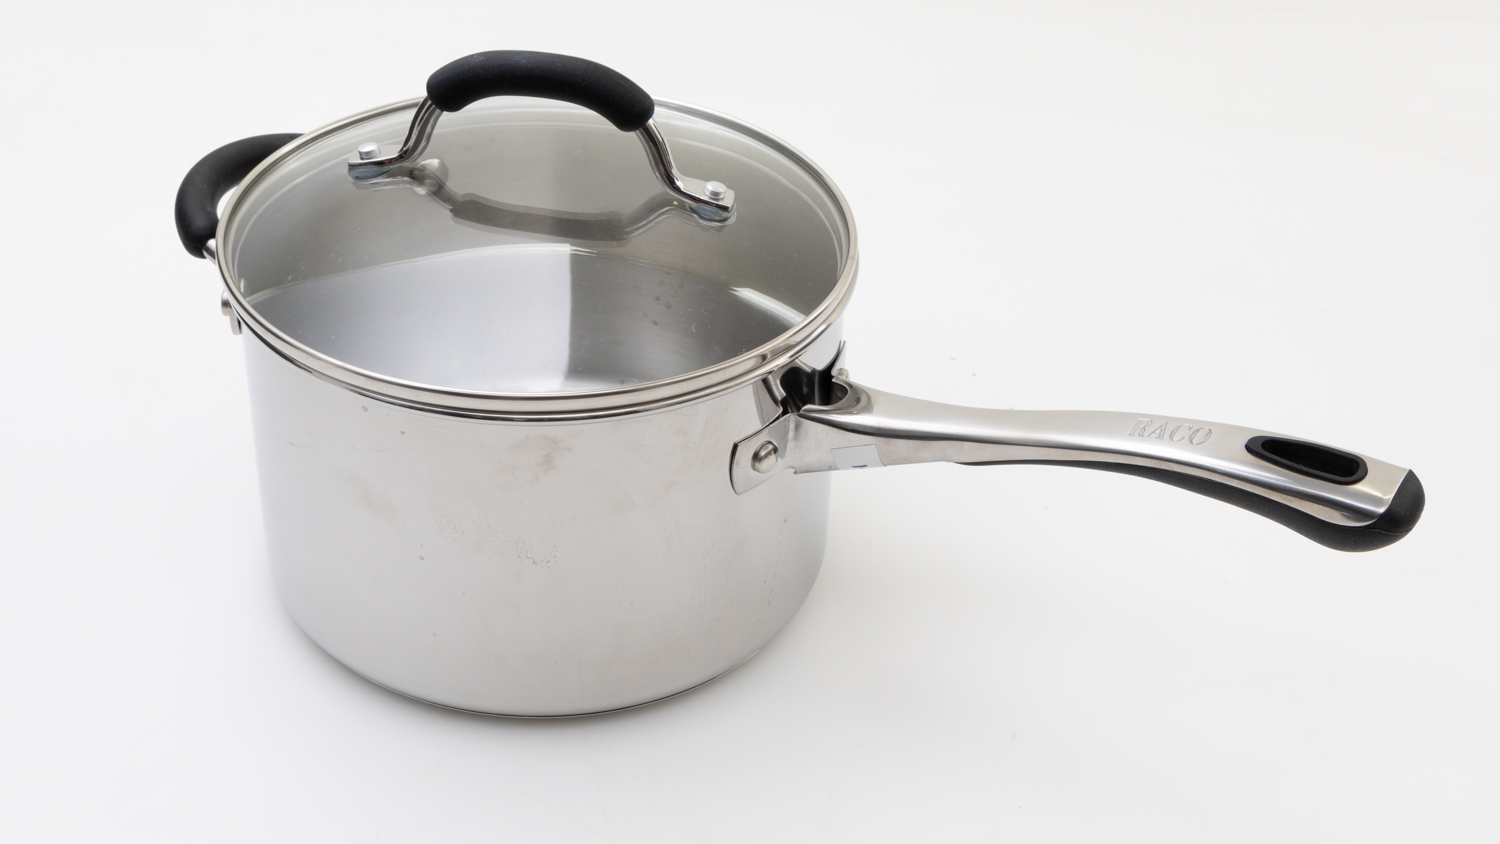 Raco Contemporary Stainless Steel 20cm Covered Saucepan 3.8Ltr carousel image